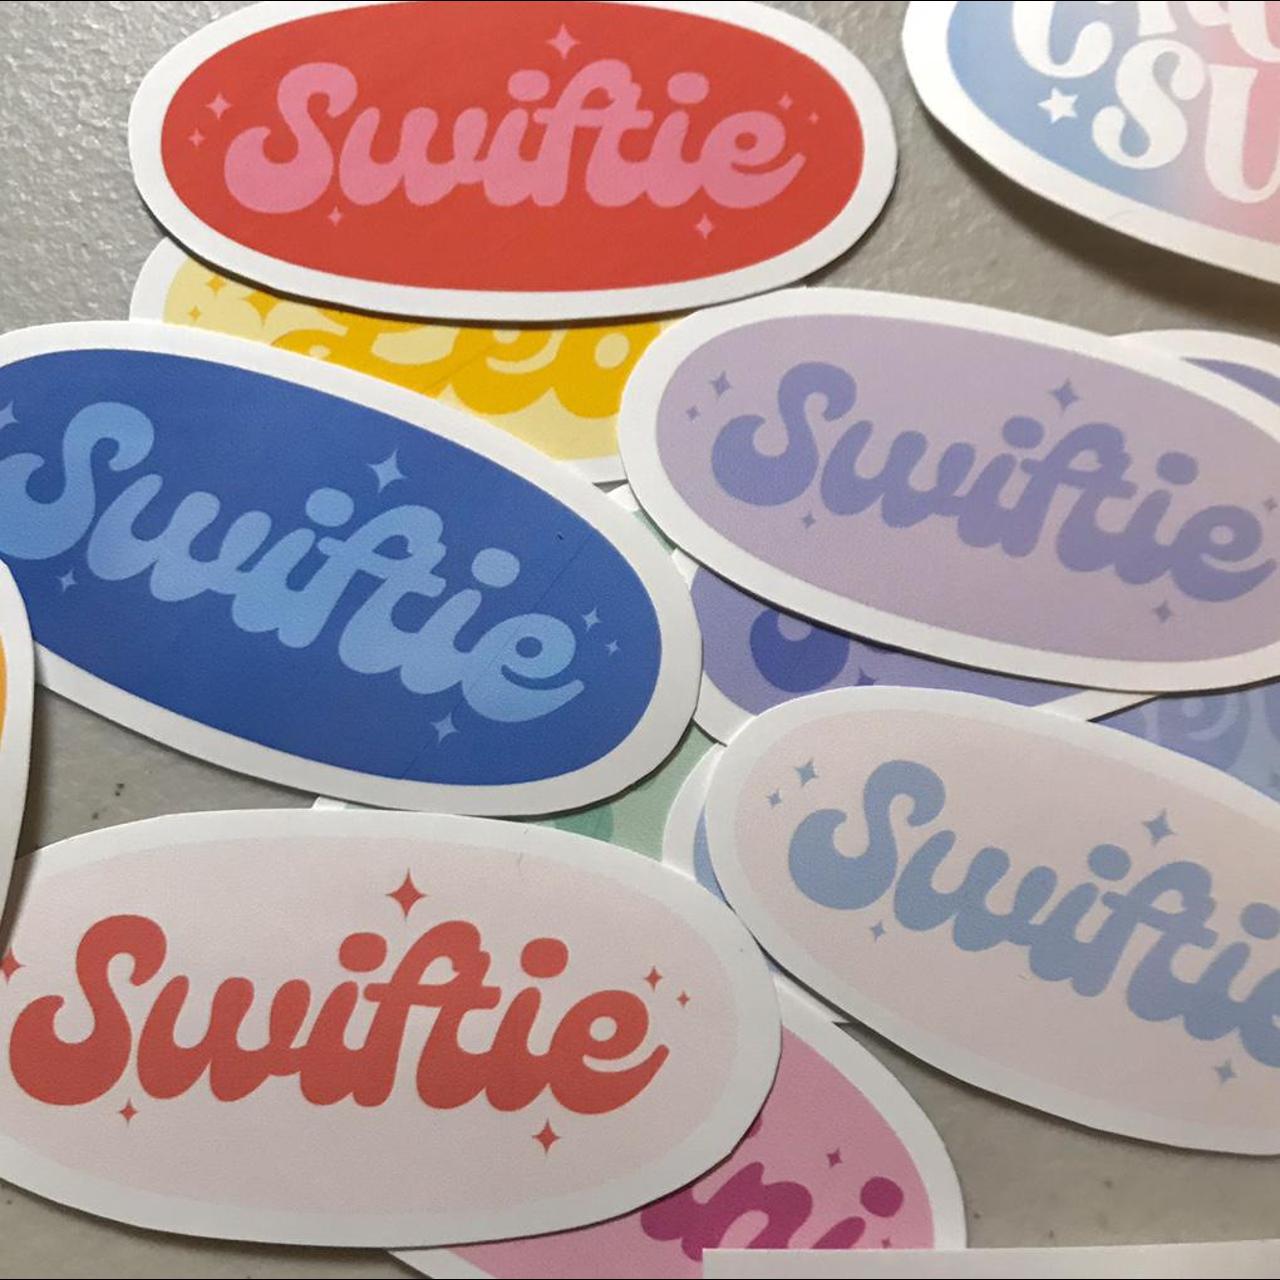 Taylor Swift lover sticker pack! Includes 3 stickers - Depop